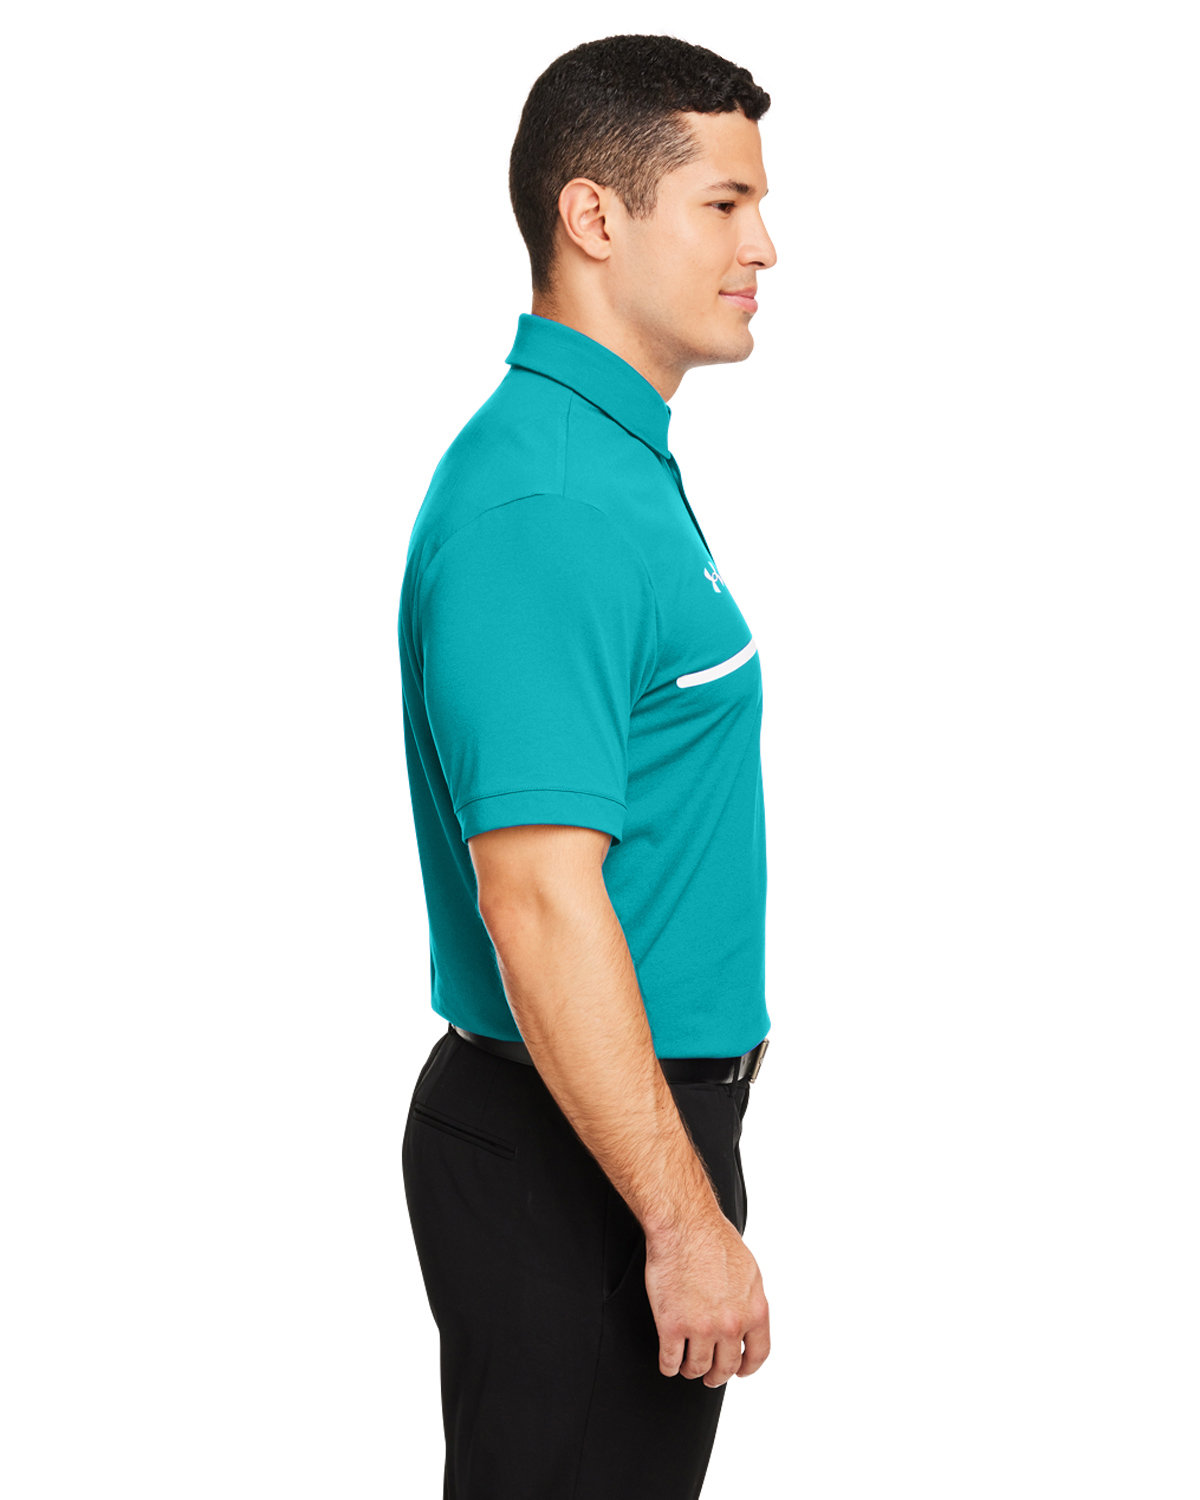 Under Armour Men's Title Polo | Generic Site - Priced